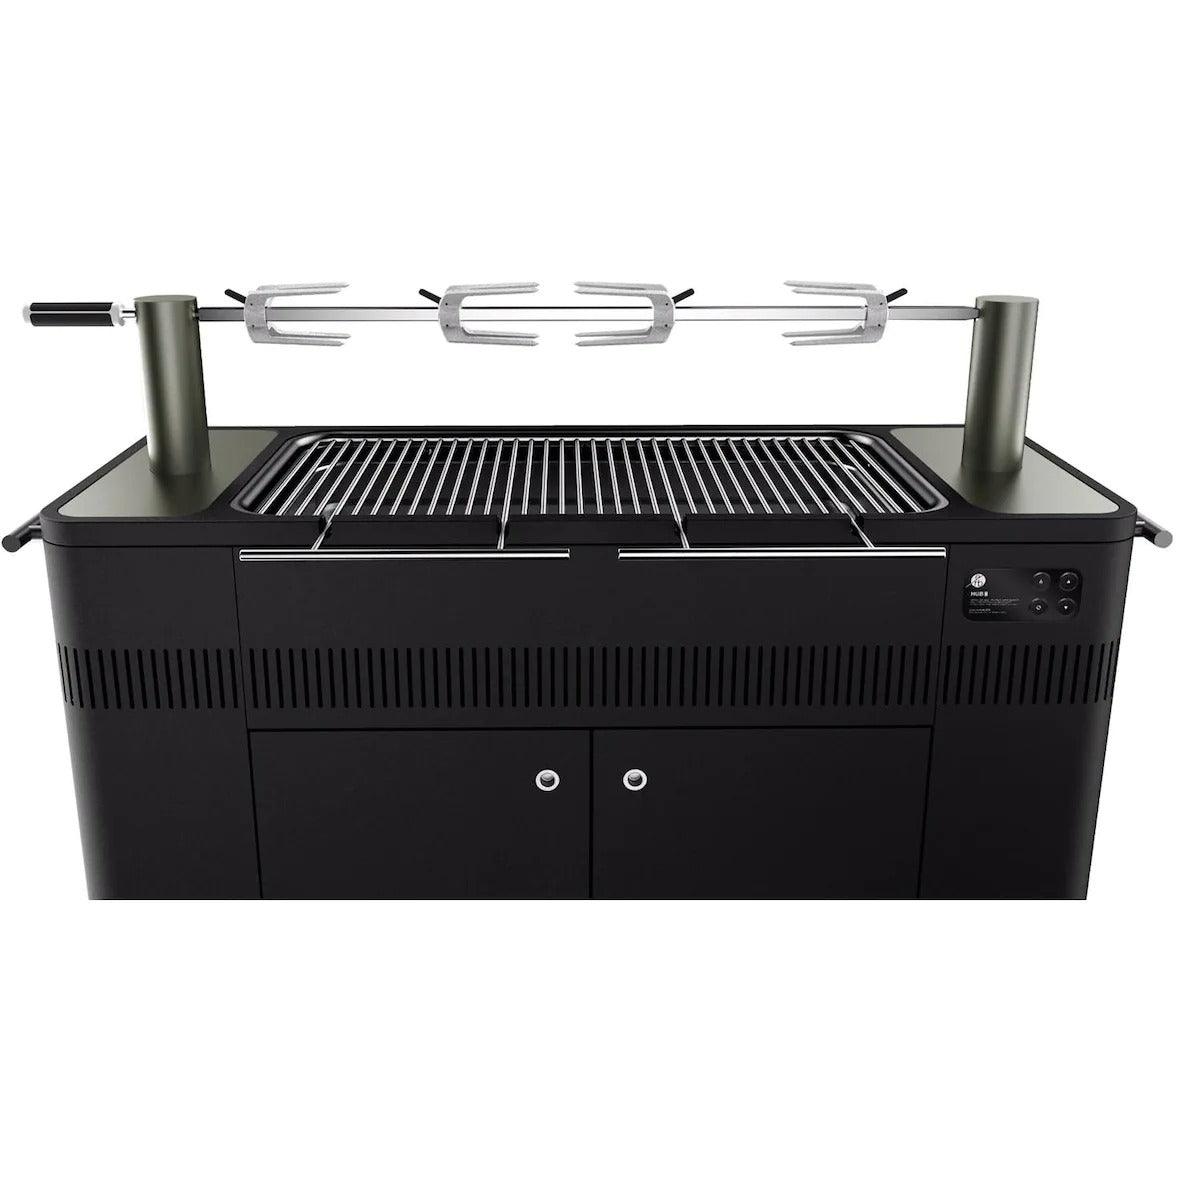 Everdure Hub II 54 Charcoal Grill with Rotisserie & Electronic Ignition - HBCE3BUS